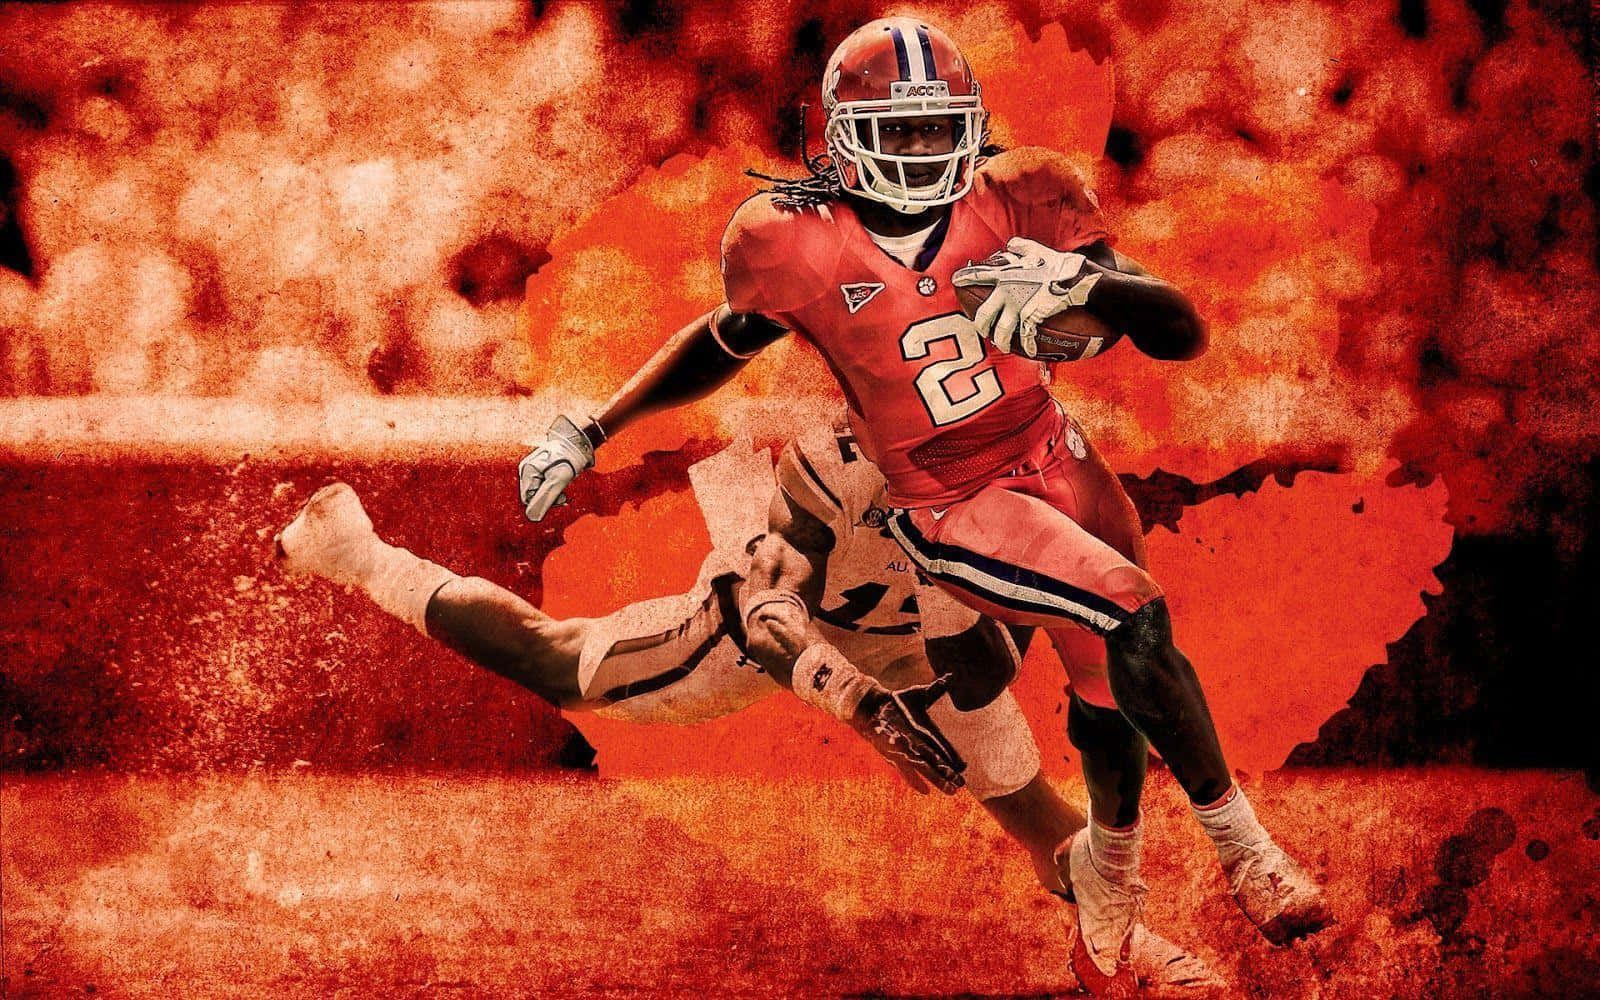 Clemson Tigers Football Player Evading Tackle Wallpaper